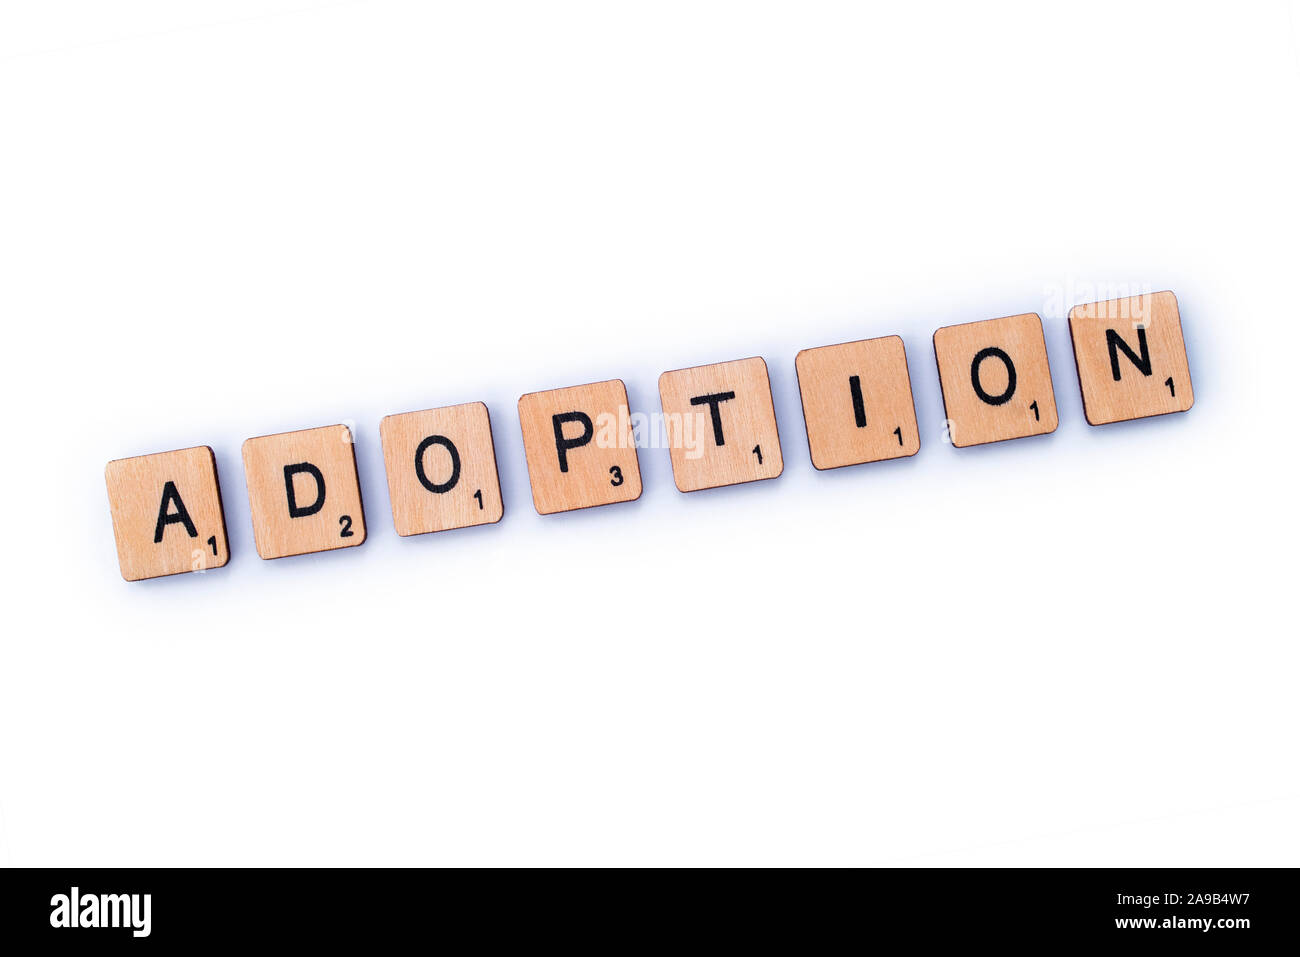 London, UK - February 6th 2019: The word ADOPTION, spelt out with wooden letter tiles. Stock Photo